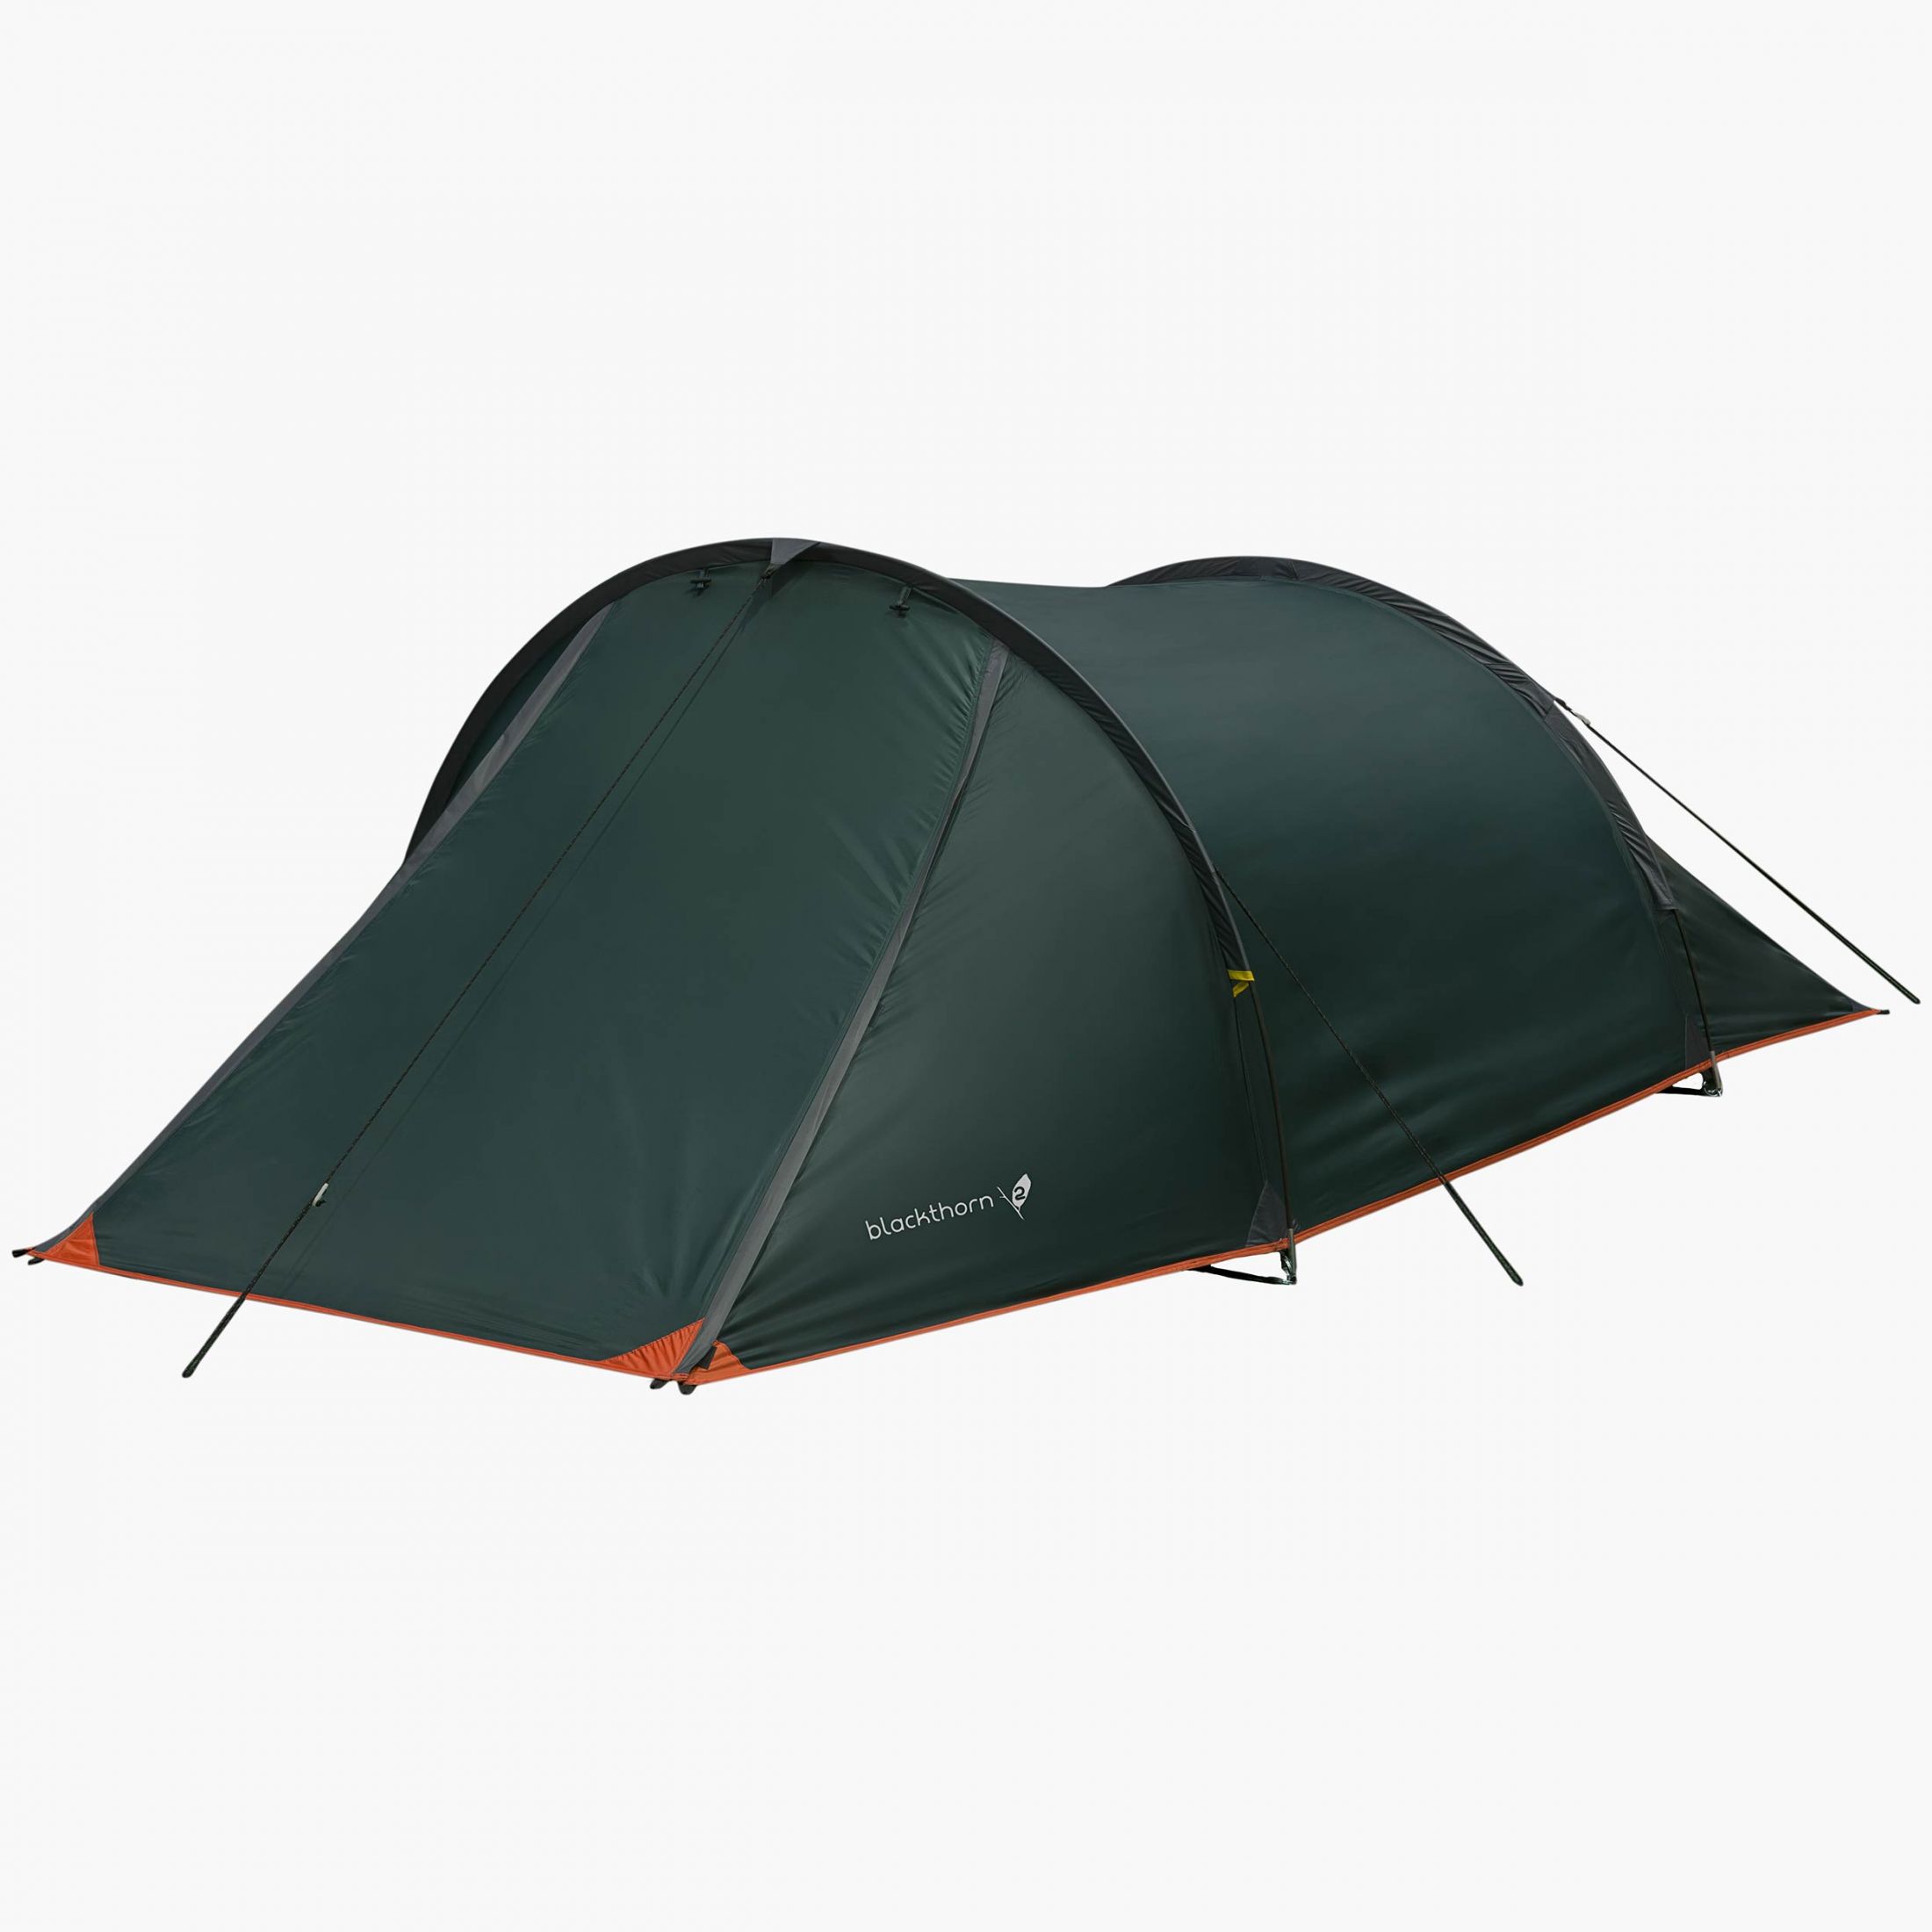 Highlander Blackthorn 2 Person Tunnel Tent Army Backpacking Camping Hunter Green